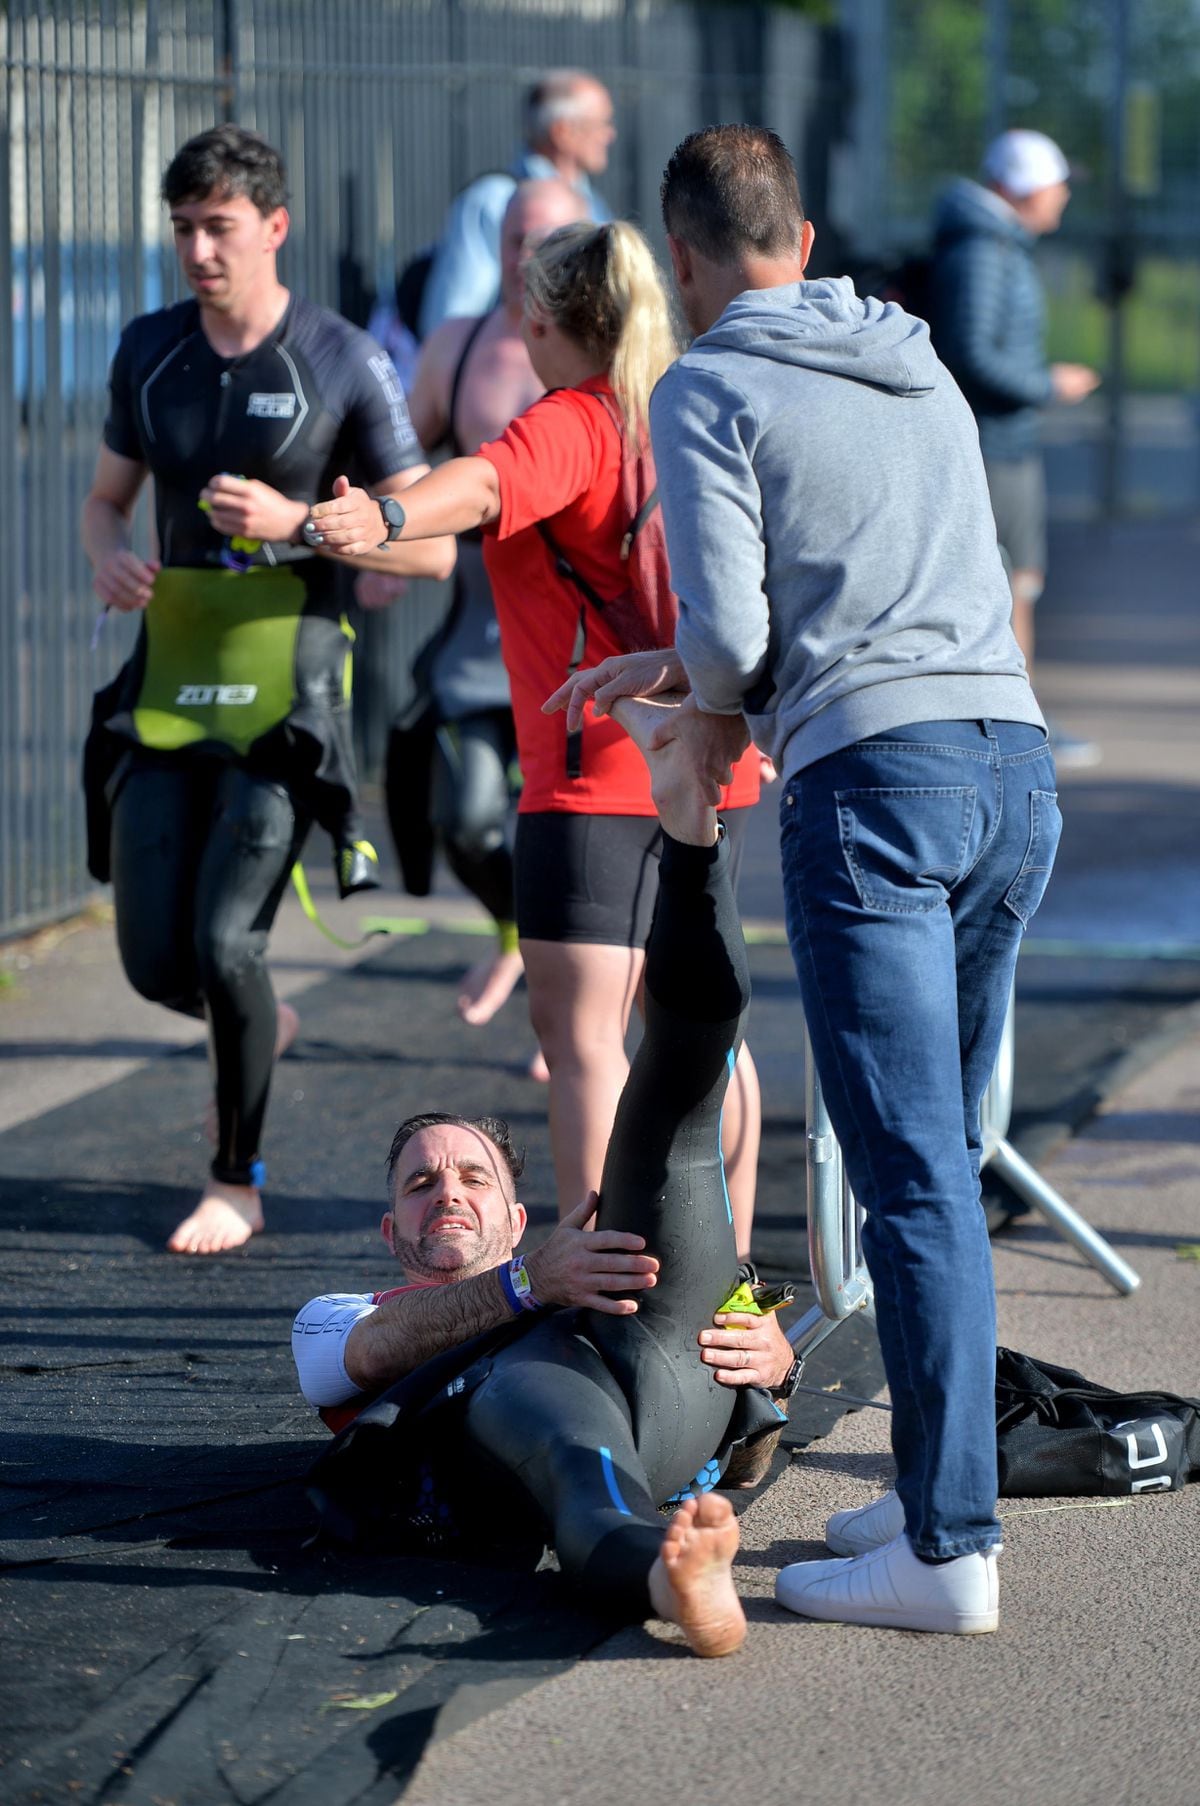 A spectator gives an exhausted triathlete cramp relief